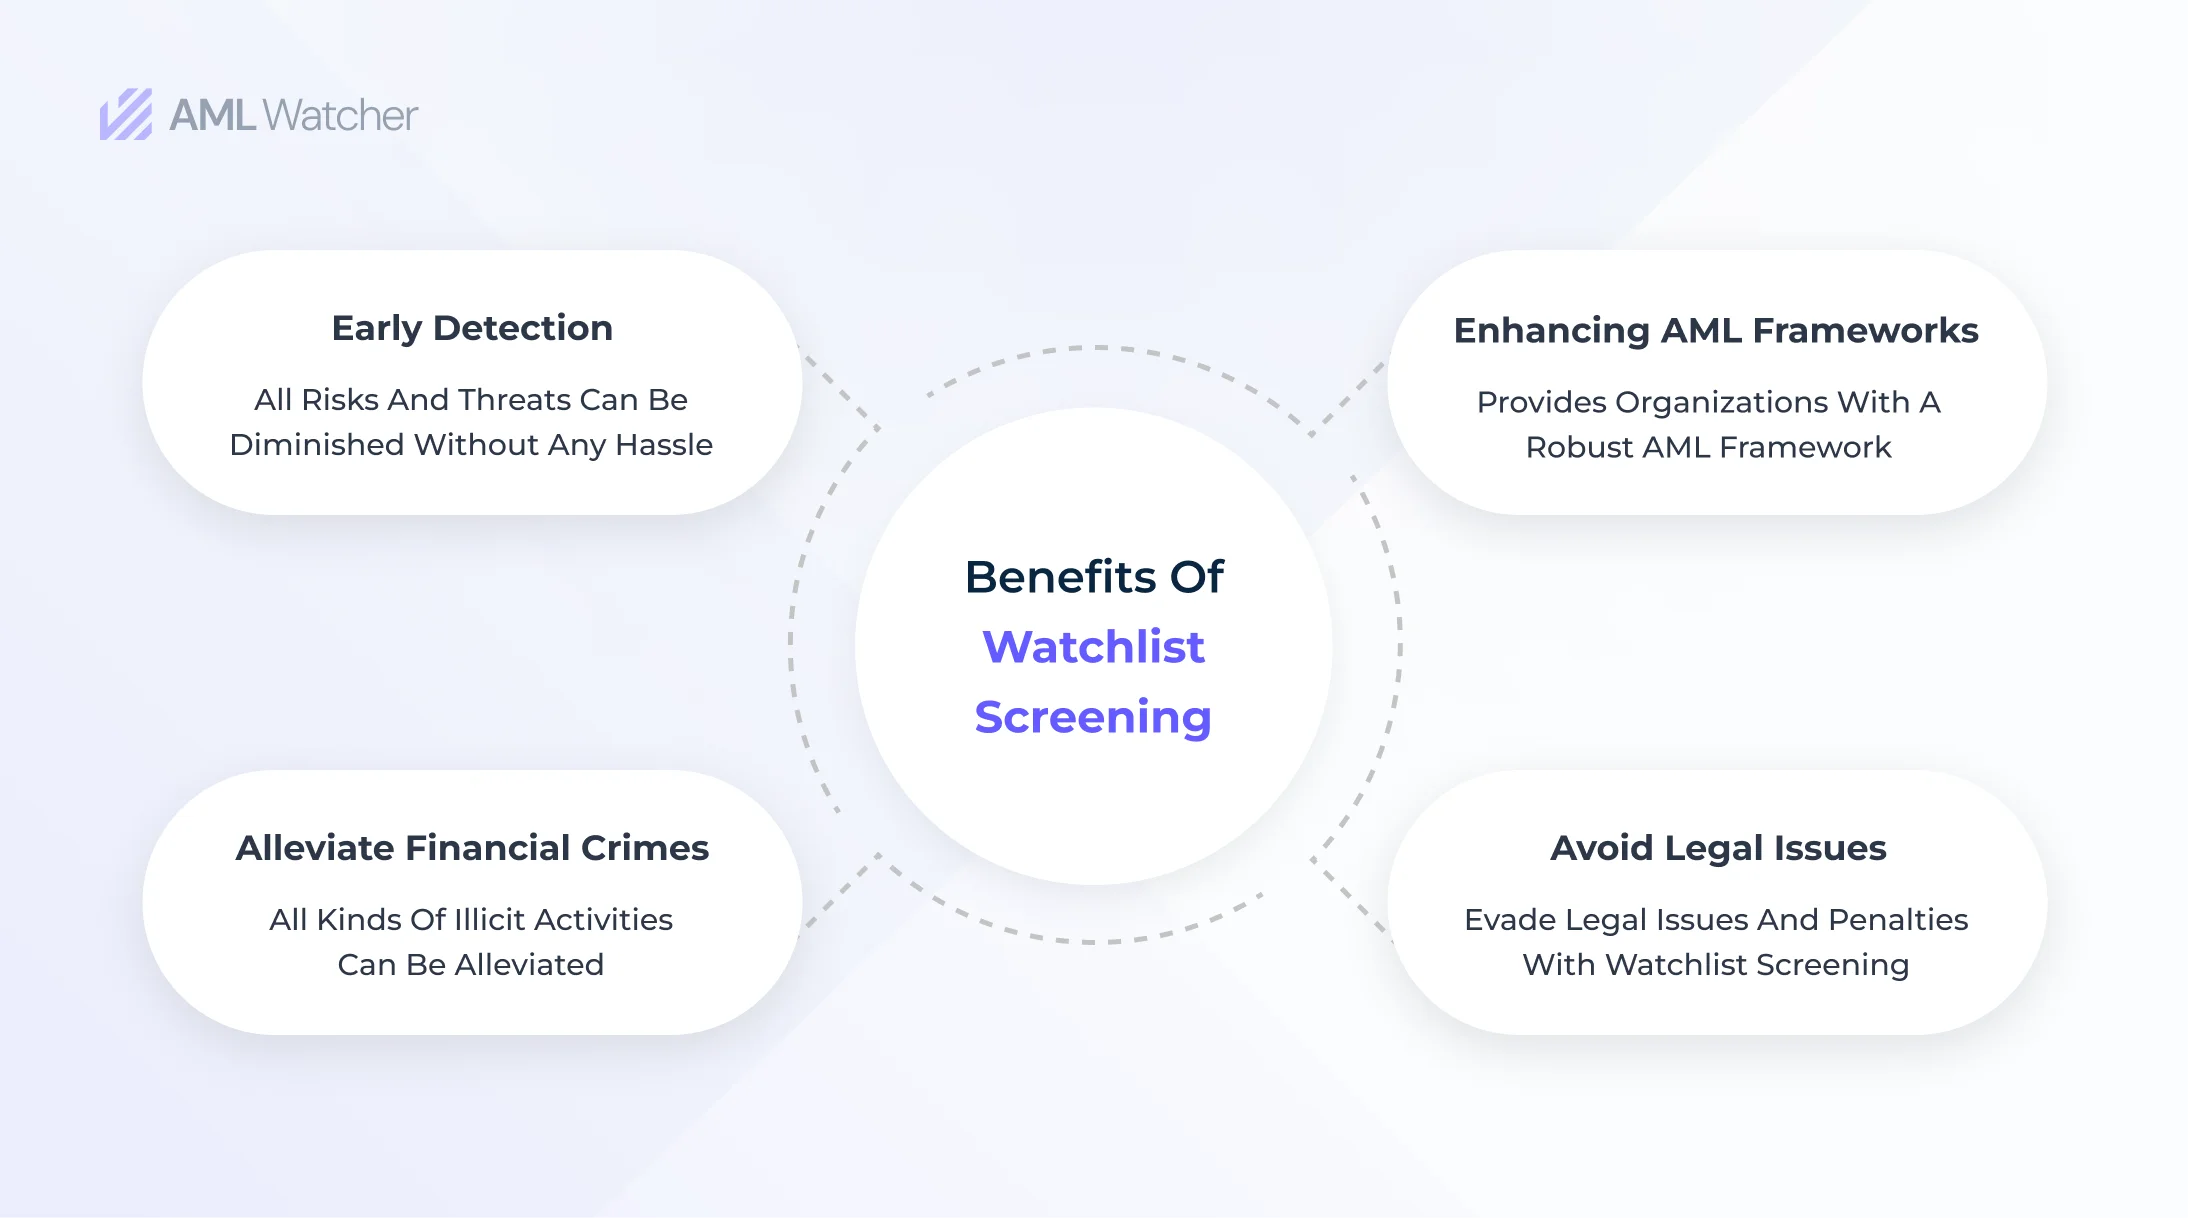 Watchlist Screening provides a large number of benefits to organizations